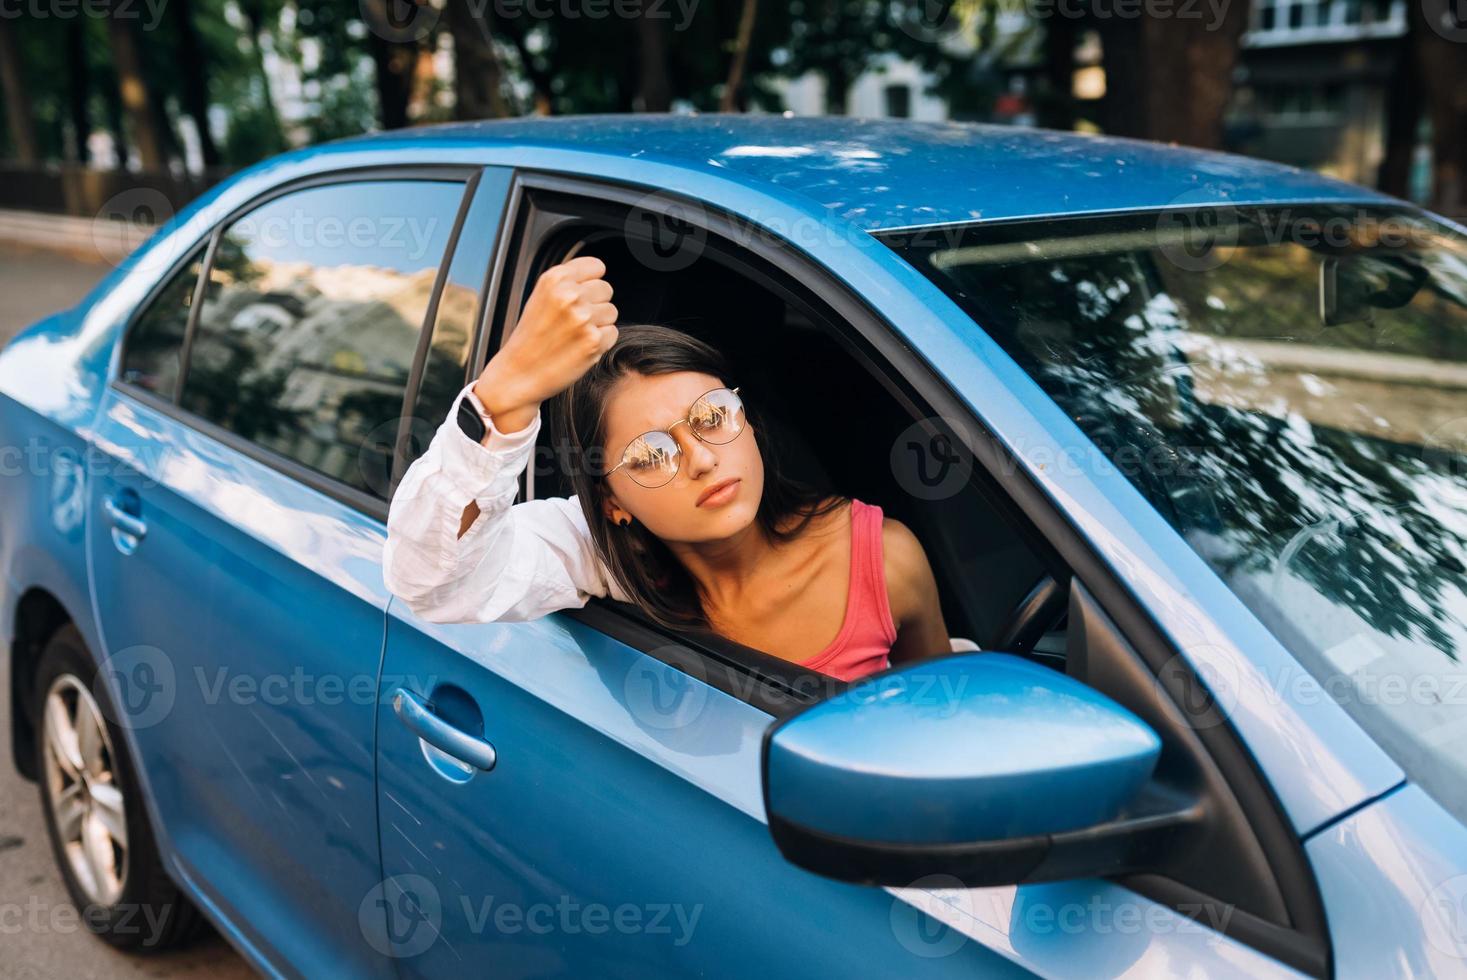 A young angry woman peeks out of the car window photo